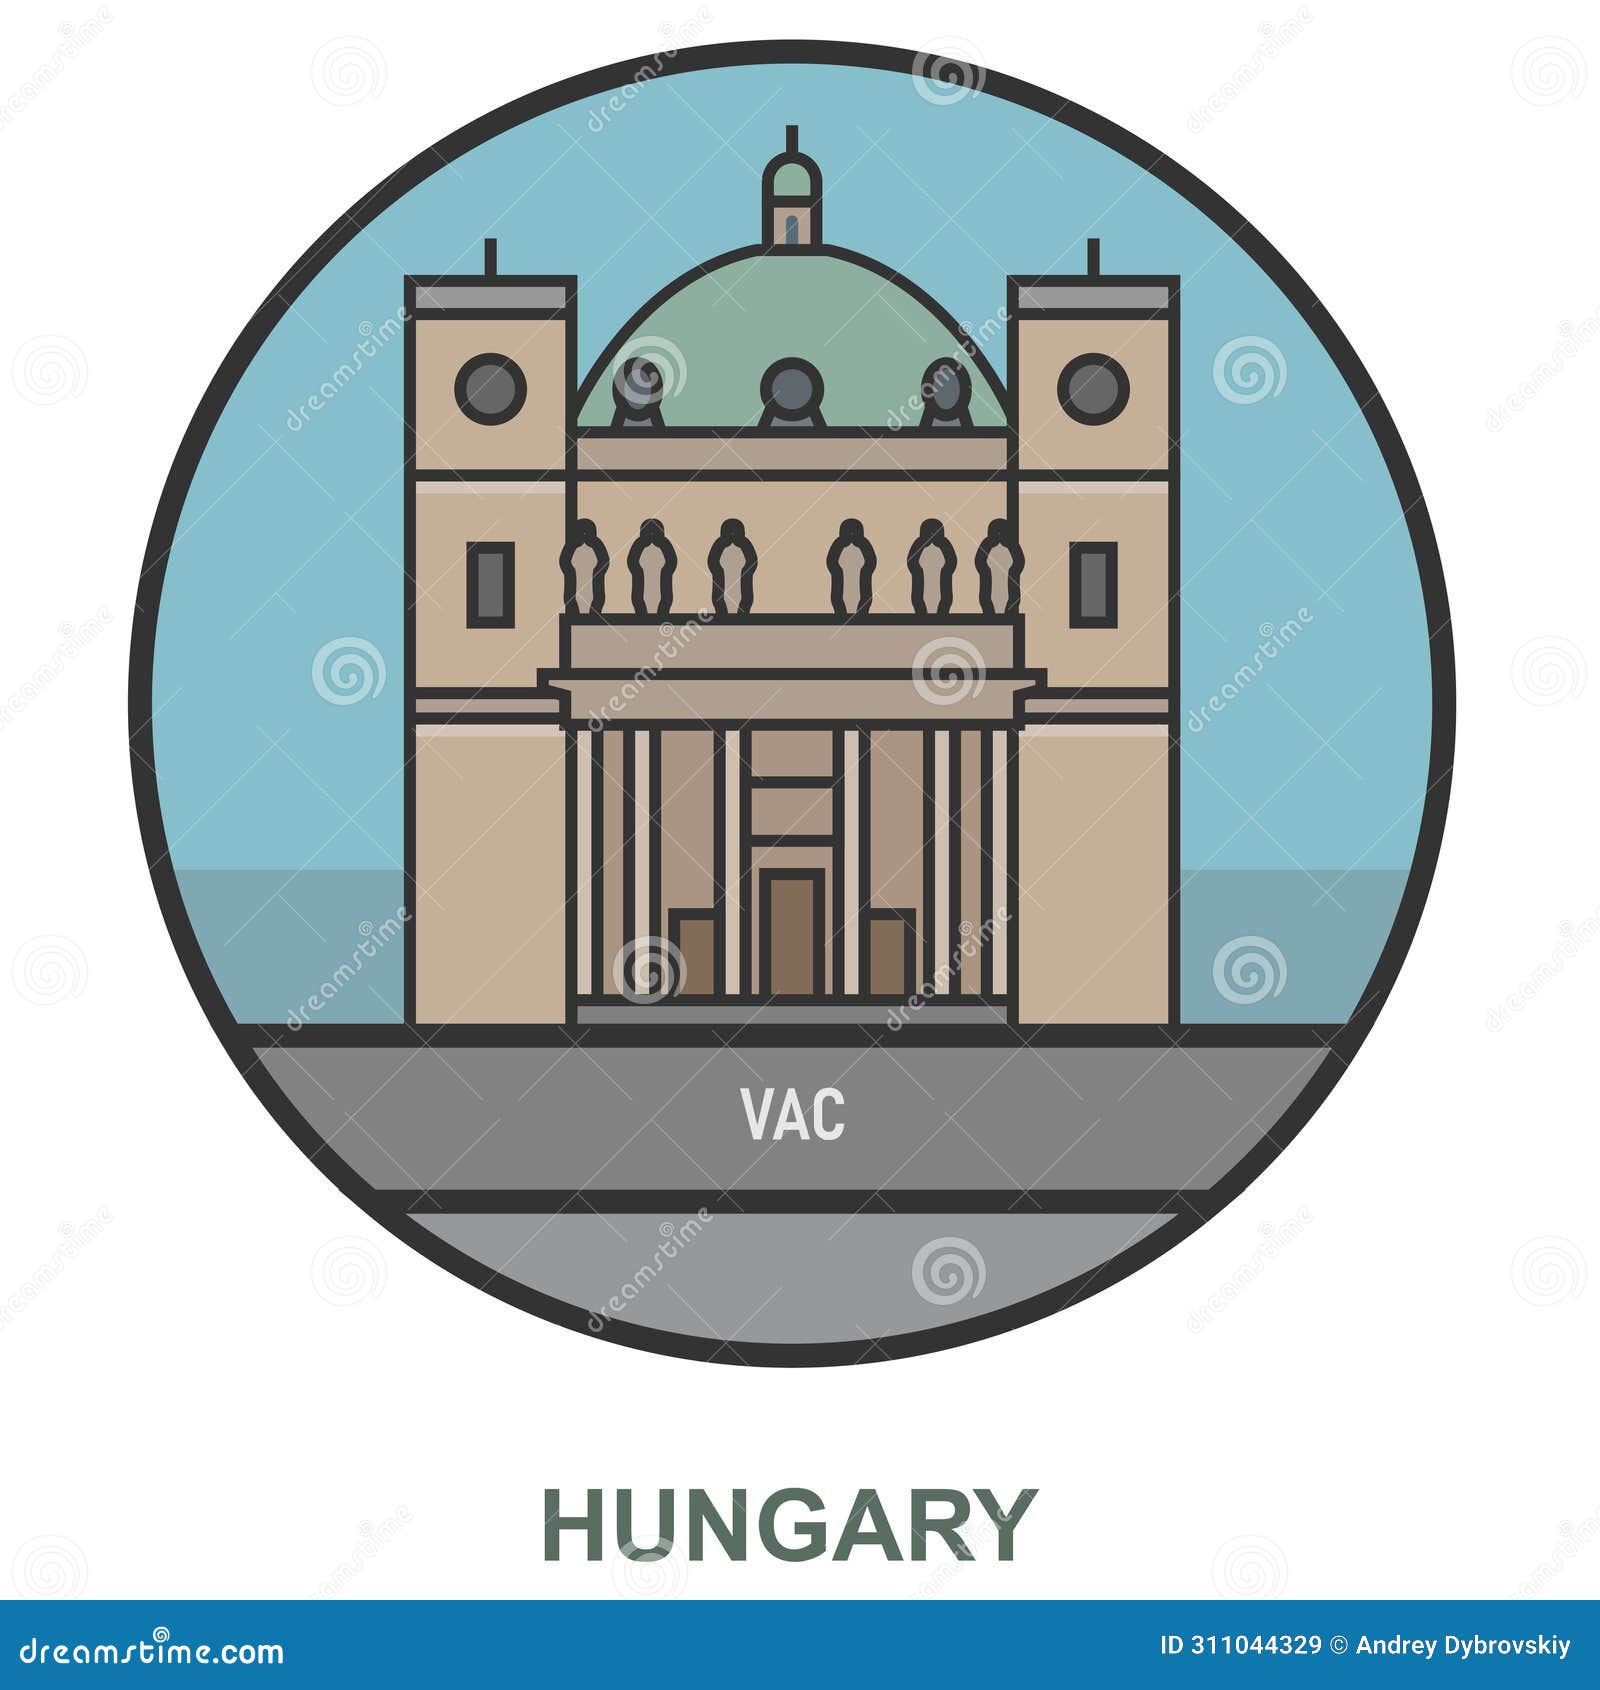 vac. cities and towns in hungary